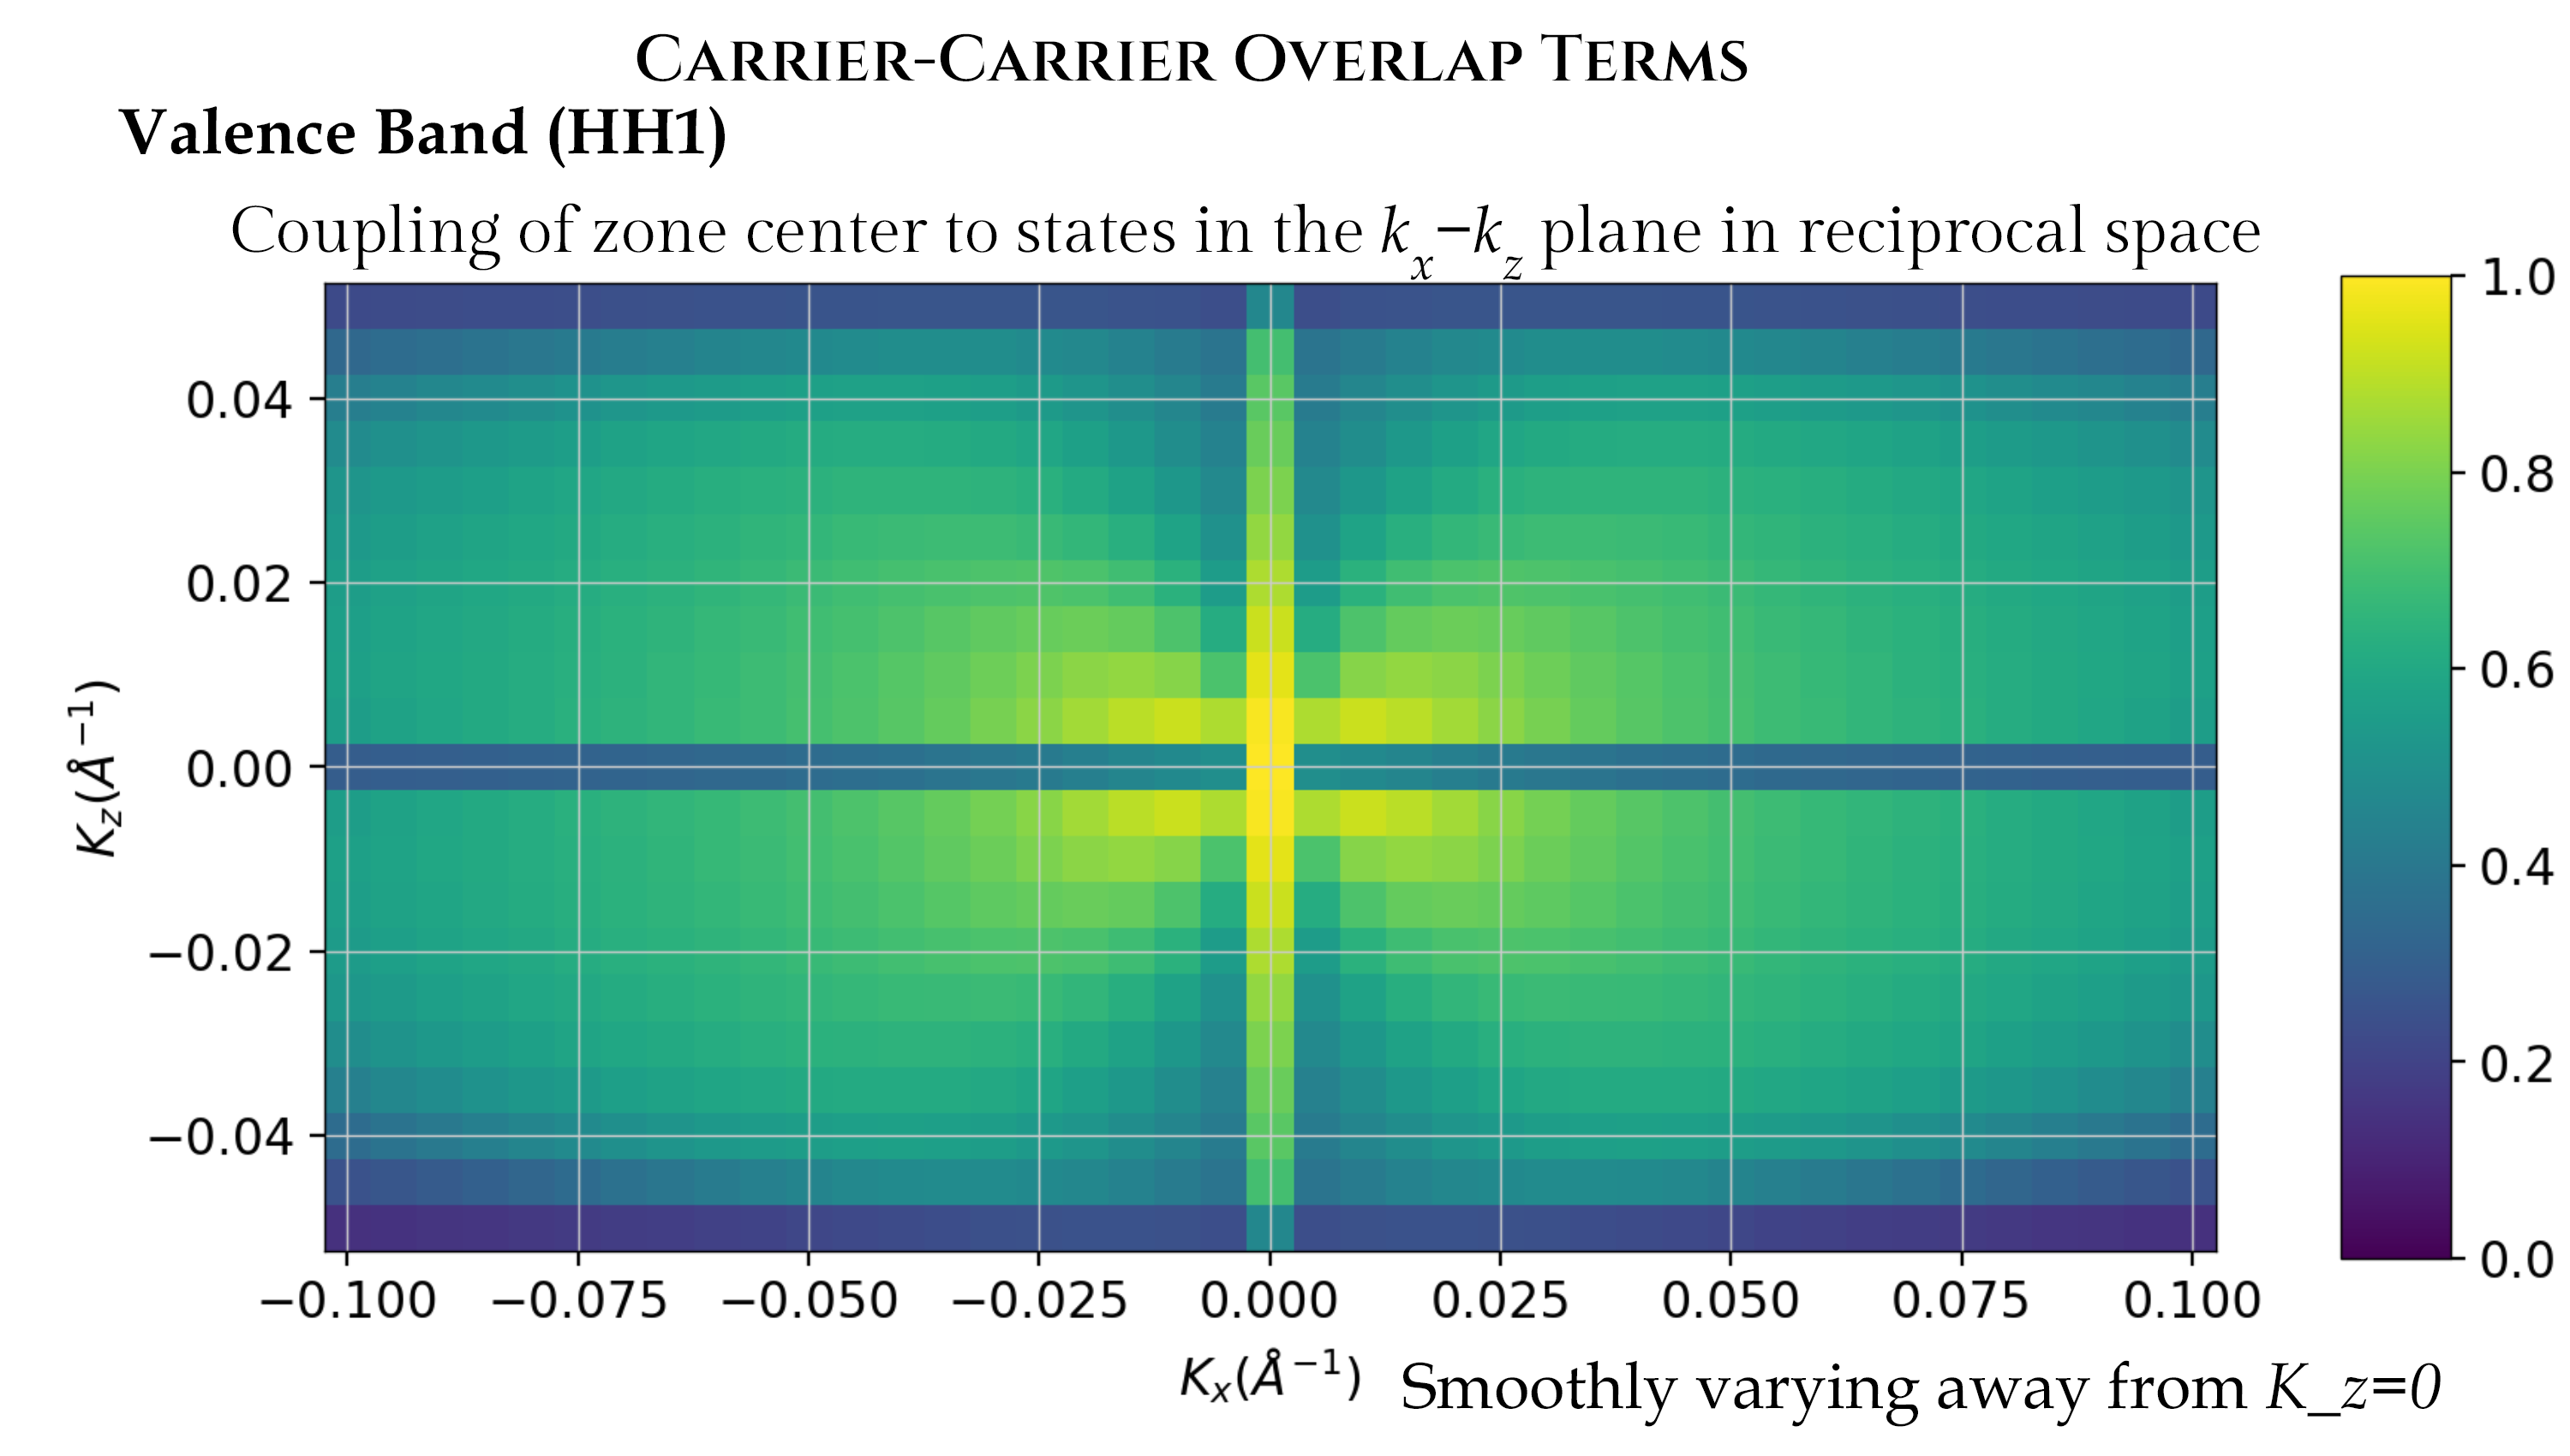 Carrier-Carrier Overlap Terms - Valence Band